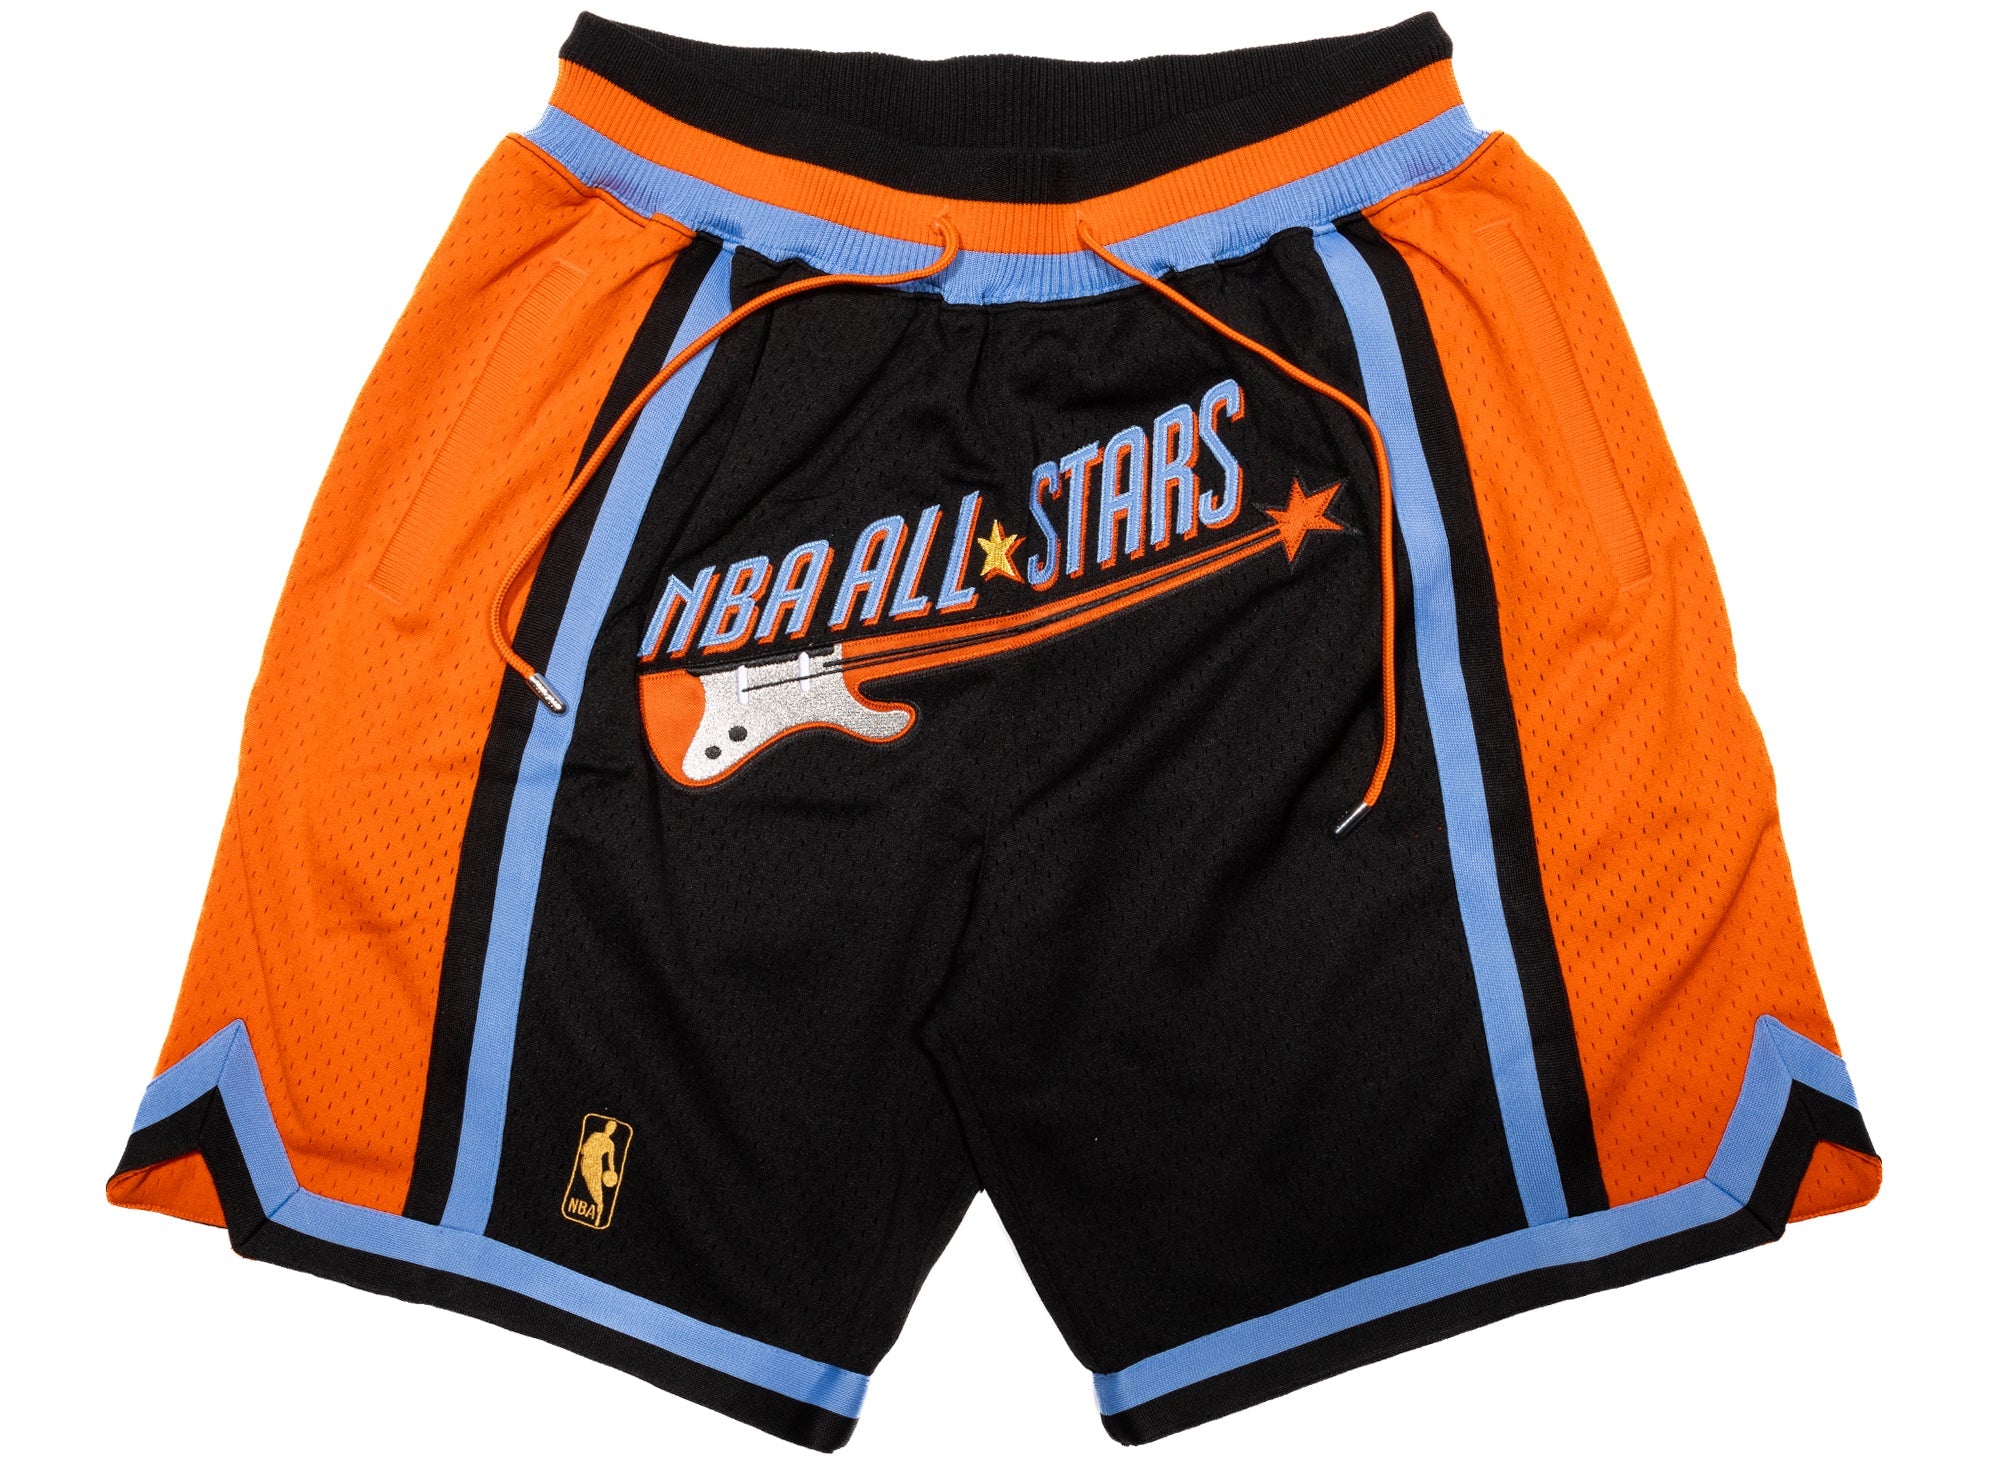 Mink Flow on X: Shop for you favorite classic NBA team shorts or